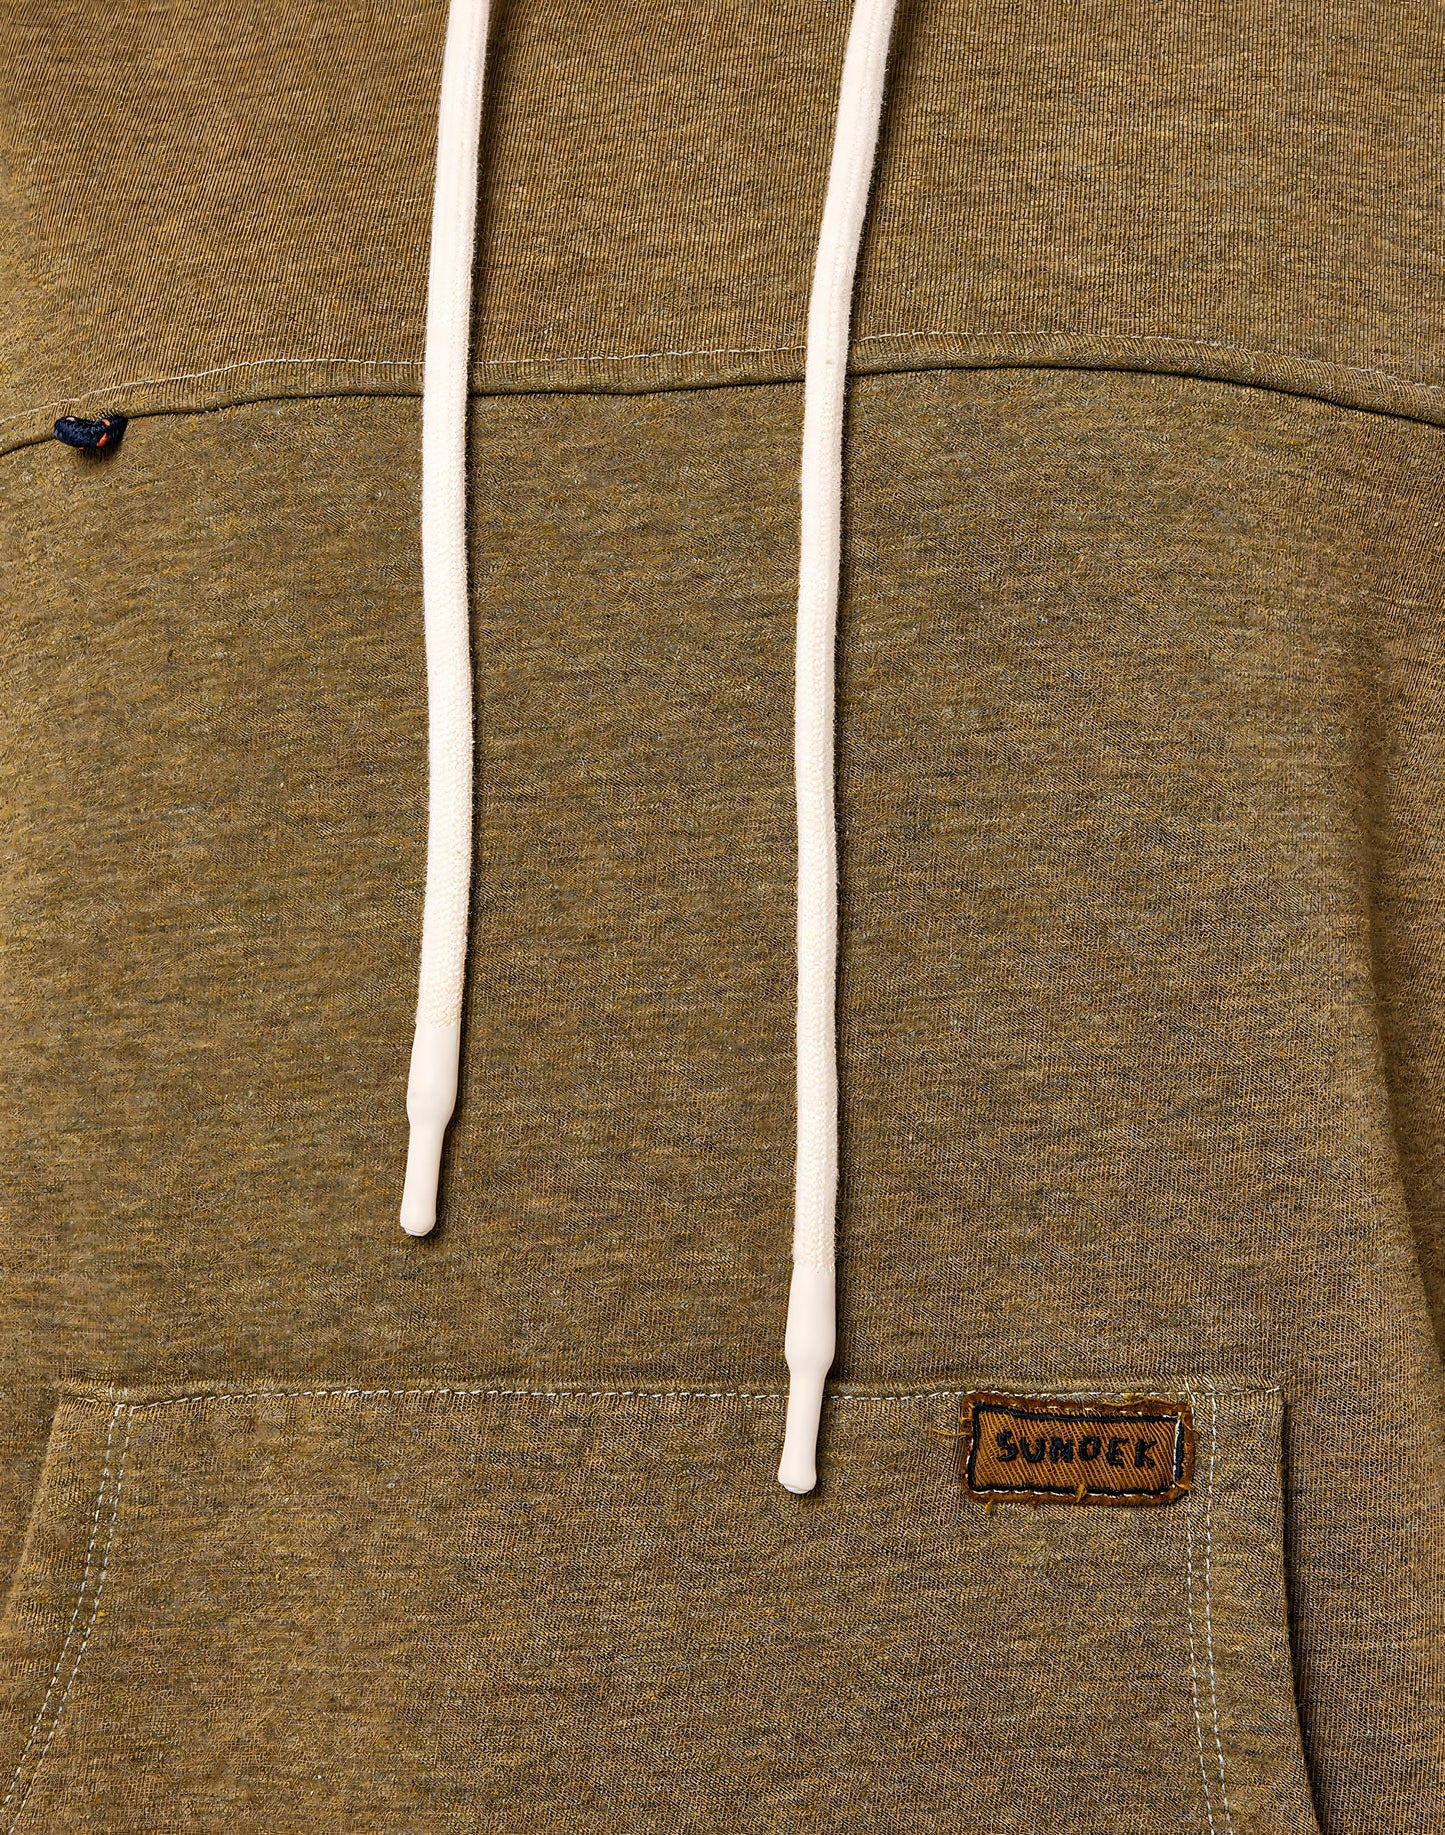 OVERDYED COTTON HOODIE